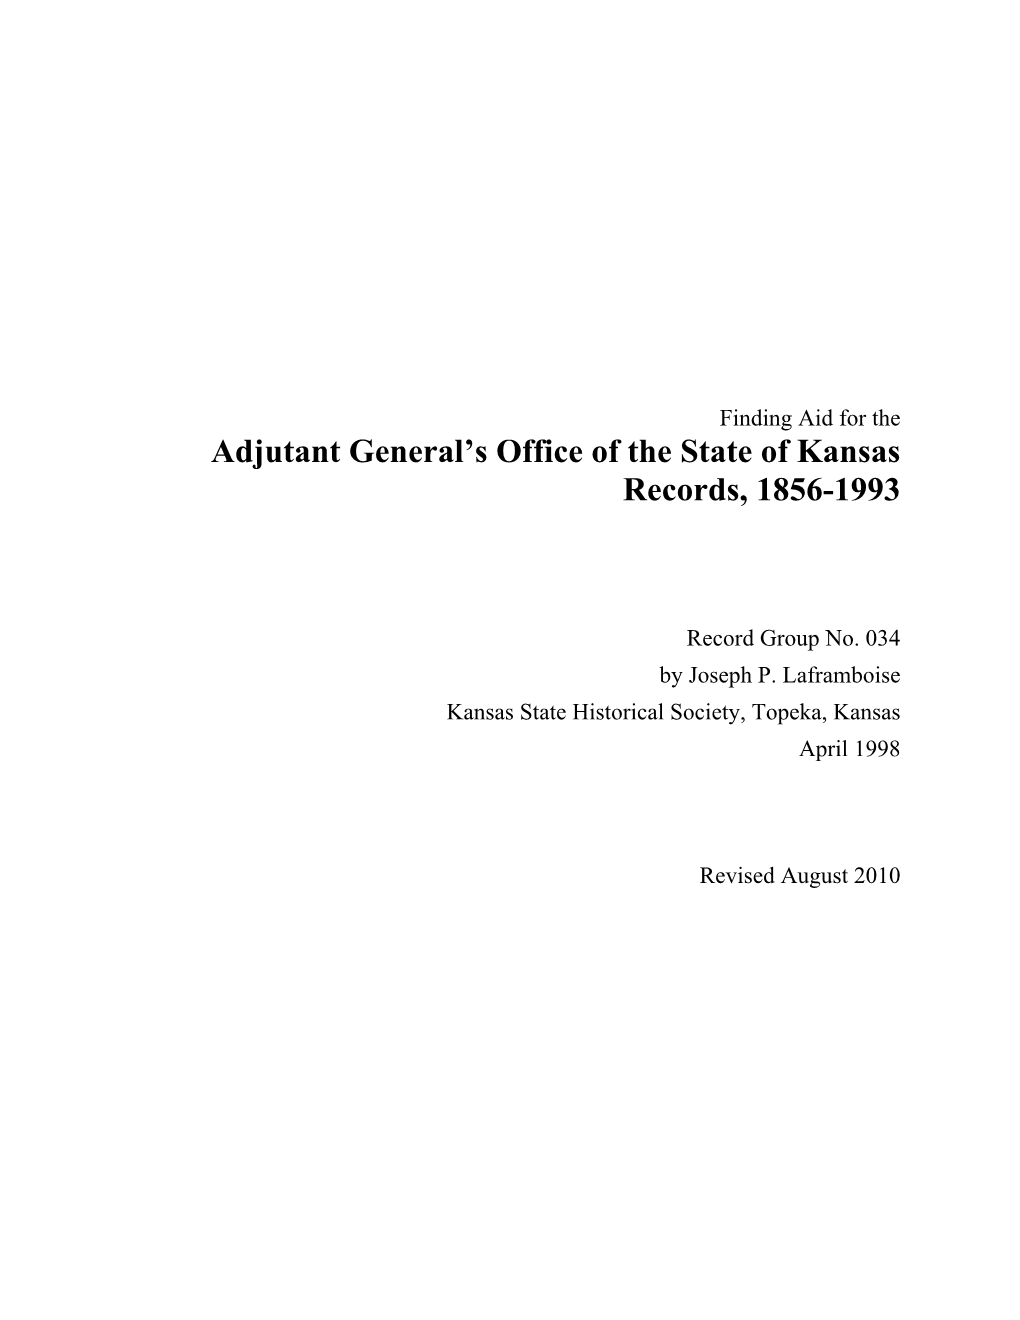 Finding Aid for the Adjutant General’S Office of the State of Kansas Records, 1856-1993